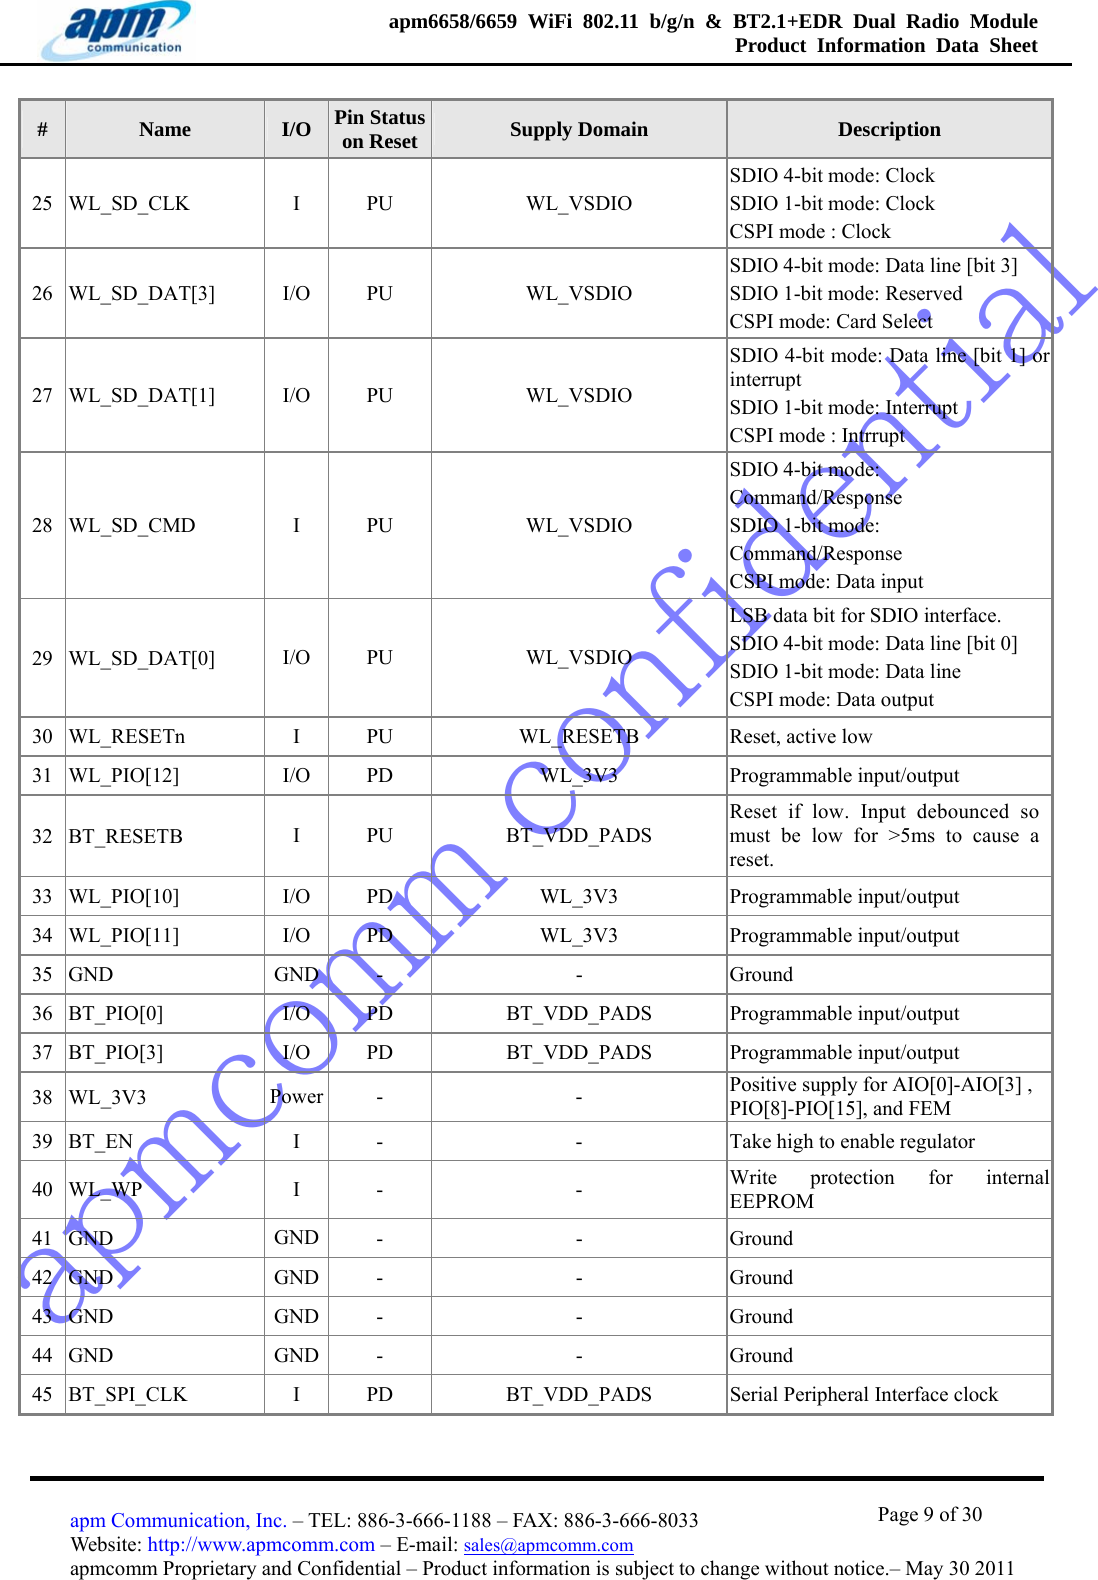 apmcomm confidentialapm6658/6659 WiFi 802.11 b/g/n &amp; BT2.1+EDR Dual Radio Module  Product Information Data Sheet                                       Page 9 of 30 apm Communication, Inc. – TEL: 886-3-666-1188 – FAX: 886-3-666-8033 Website: http://www.apmcomm.com – E-mail: sales@apmcomm.com  apmcomm Proprietary and Confidential – Product information is subject to change without notice.– May 30 2011 #  Name  I/O  Pin Status on Reset  Supply Domain  Description 25 WL_SD_CLK  I  PU WL_VSDIO SDIO 4-bit mode: Clock SDIO 1-bit mode: Clock CSPI mode : Clock 26 WL_SD_DAT[3]  I/O  PU WL_VSDIO SDIO 4-bit mode: Data line [bit 3] SDIO 1-bit mode: Reserved CSPI mode: Card Select 27 WL_SD_DAT[1]  I/O  PU WL_VSDIO SDIO 4-bit mode: Data line [bit 1] or interrupt SDIO 1-bit mode: Interrupt CSPI mode : Intrrupt 28 WL_SD_CMD  I  PU WL_VSDIO SDIO 4-bit mode: Command/Response SDIO 1-bit mode: Command/Response CSPI mode: Data input 29 WL_SD_DAT[0]  I/O  PU WL_VSDIO LSB data bit for SDIO interface. SDIO 4-bit mode: Data line [bit 0] SDIO 1-bit mode: Data line CSPI mode: Data output 30 WL_RESETn  I  PU  WL_RESETB  Reset, active low   31 WL_PIO[12]  I/O  PD WL_3V3 Programmable input/output 32 BT_RESETB  I  PU BT_VDD_PADS Reset if low. Input debounced so must be low for &gt;5ms to cause a reset. 33 WL_PIO[10]  I/O  PD WL_3V3 Programmable input/output  34 WL_PIO[11]  I/O  PD WL_3V3 Programmable input/output  35 GND  GND  - - Ground 36 BT_PIO[0]  I/O  PD BT_VDD_PADS Programmable input/output  37 BT_PIO[3]  I/O  PD BT_VDD_PADS Programmable input/output  38 WL_3V3  Power  - - Positive supply for AIO[0]-AIO[3] , PIO[8]-PIO[15], and FEM 39 BT_EN  I  -  -  Take high to enable regulator 40 WL_WP  I  - - Write protection for internal EEPROM 41 GND  GND  - - Ground 42 GND  GND  - - Ground 43 GND  GND  - - Ground 44 GND  GND  - - Ground 45 BT_SPI_CLK  I  PD  BT_VDD_PADS  Serial Peripheral Interface clock 